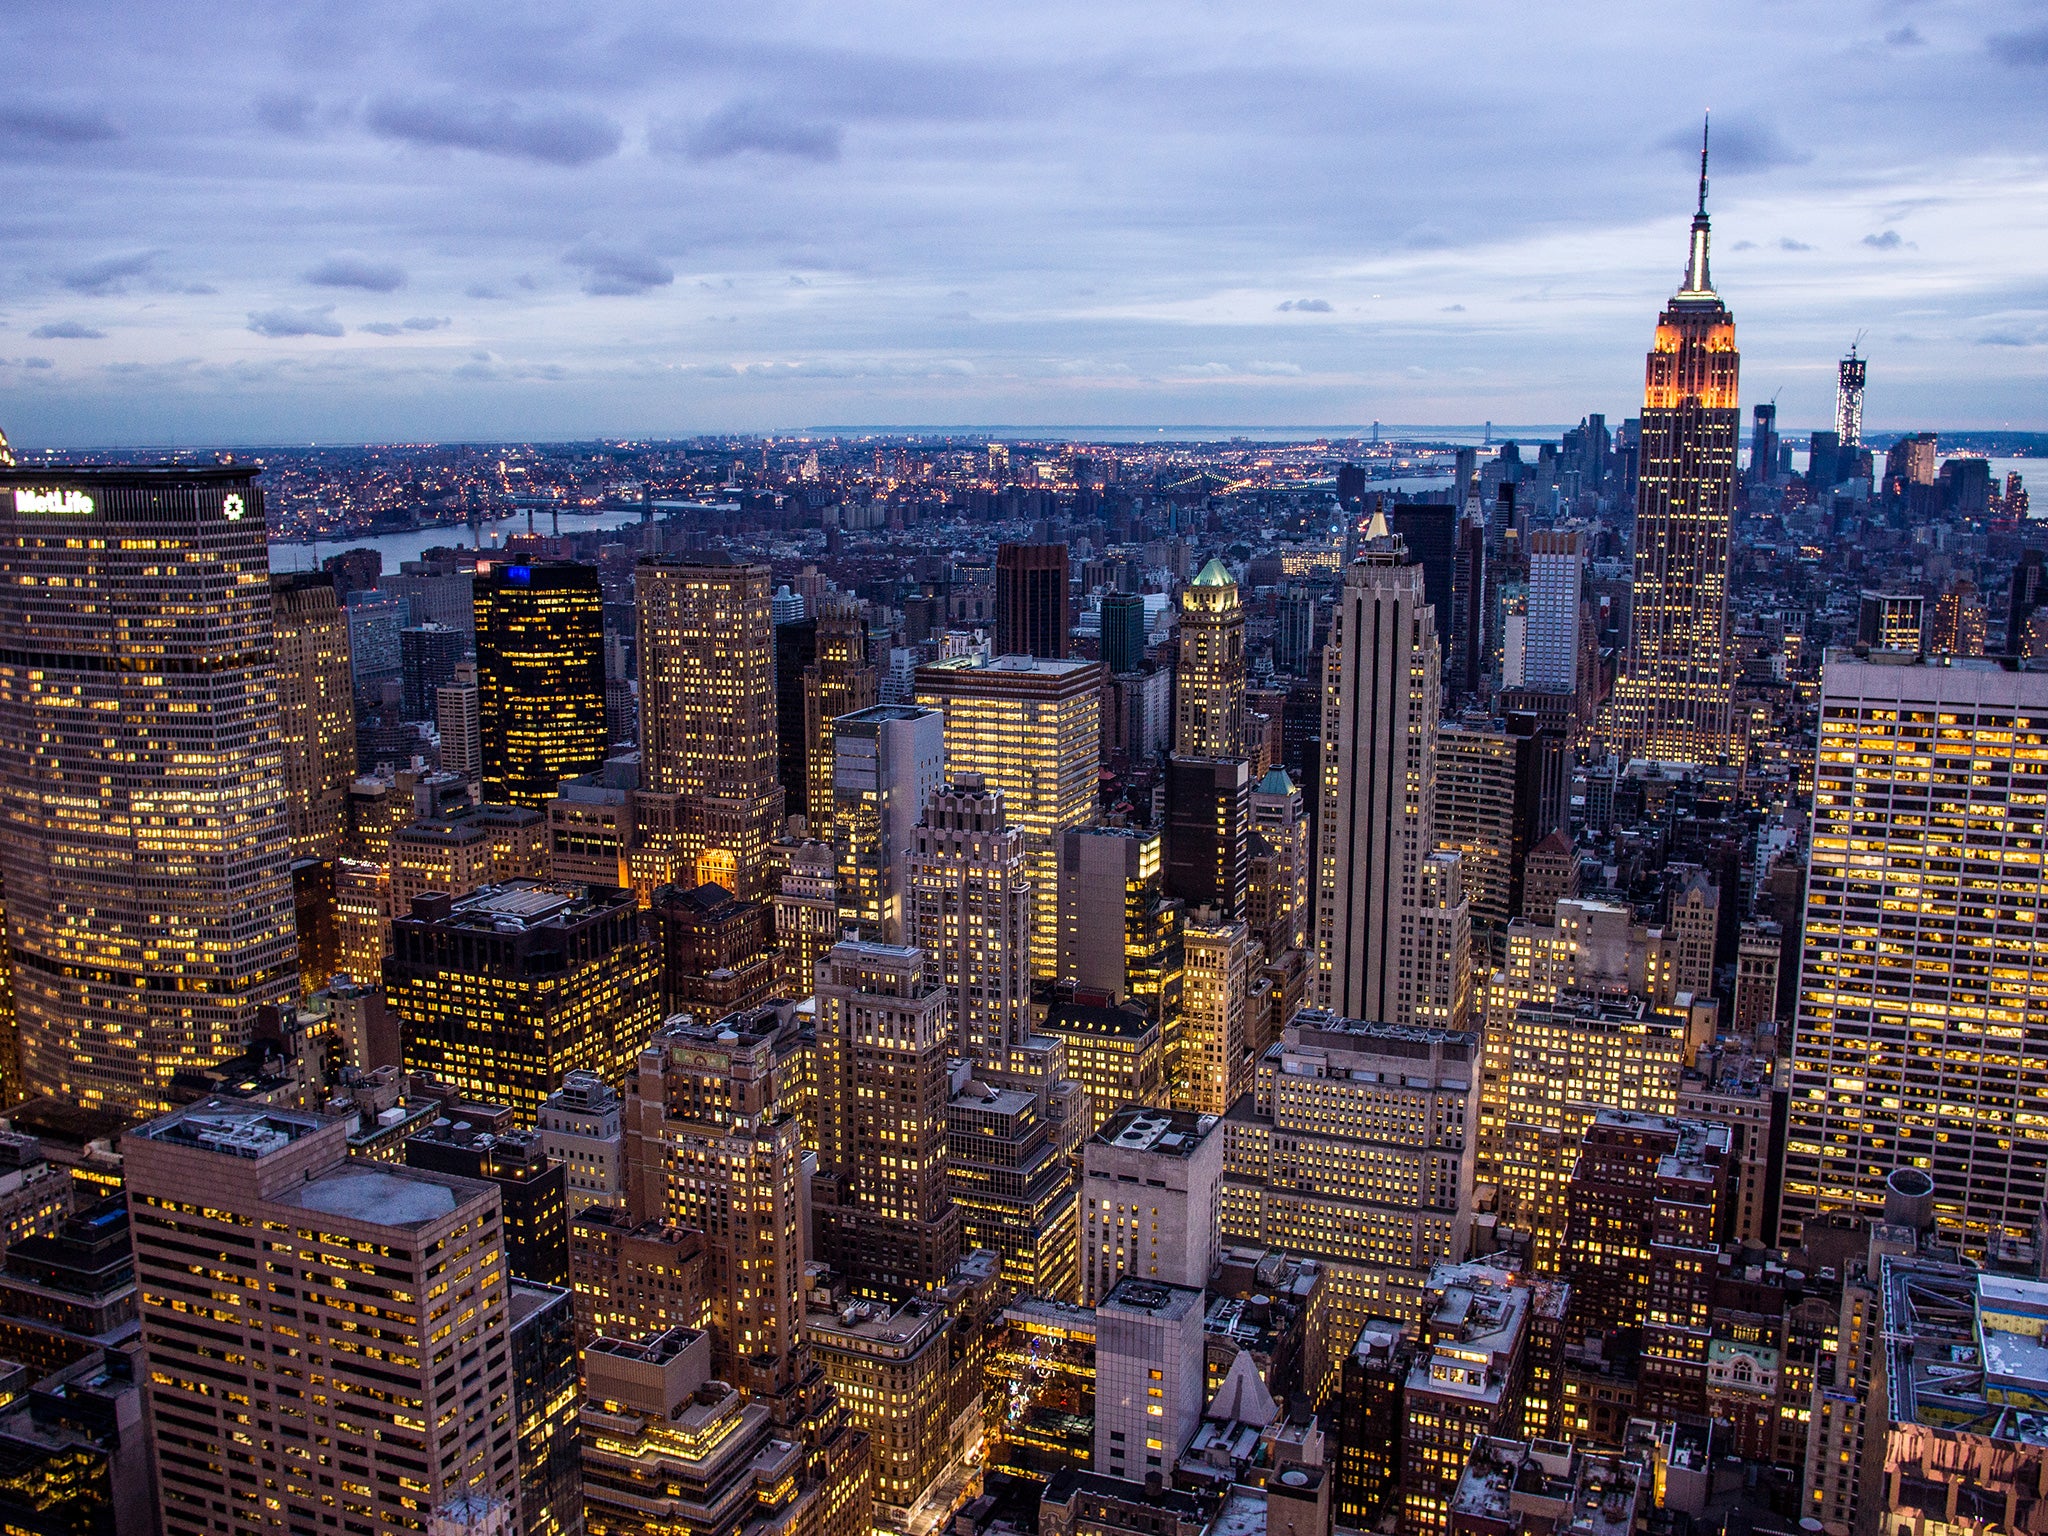 Fares from Luton to New York’s Newark airport for the months ahead are typically £1,170 return